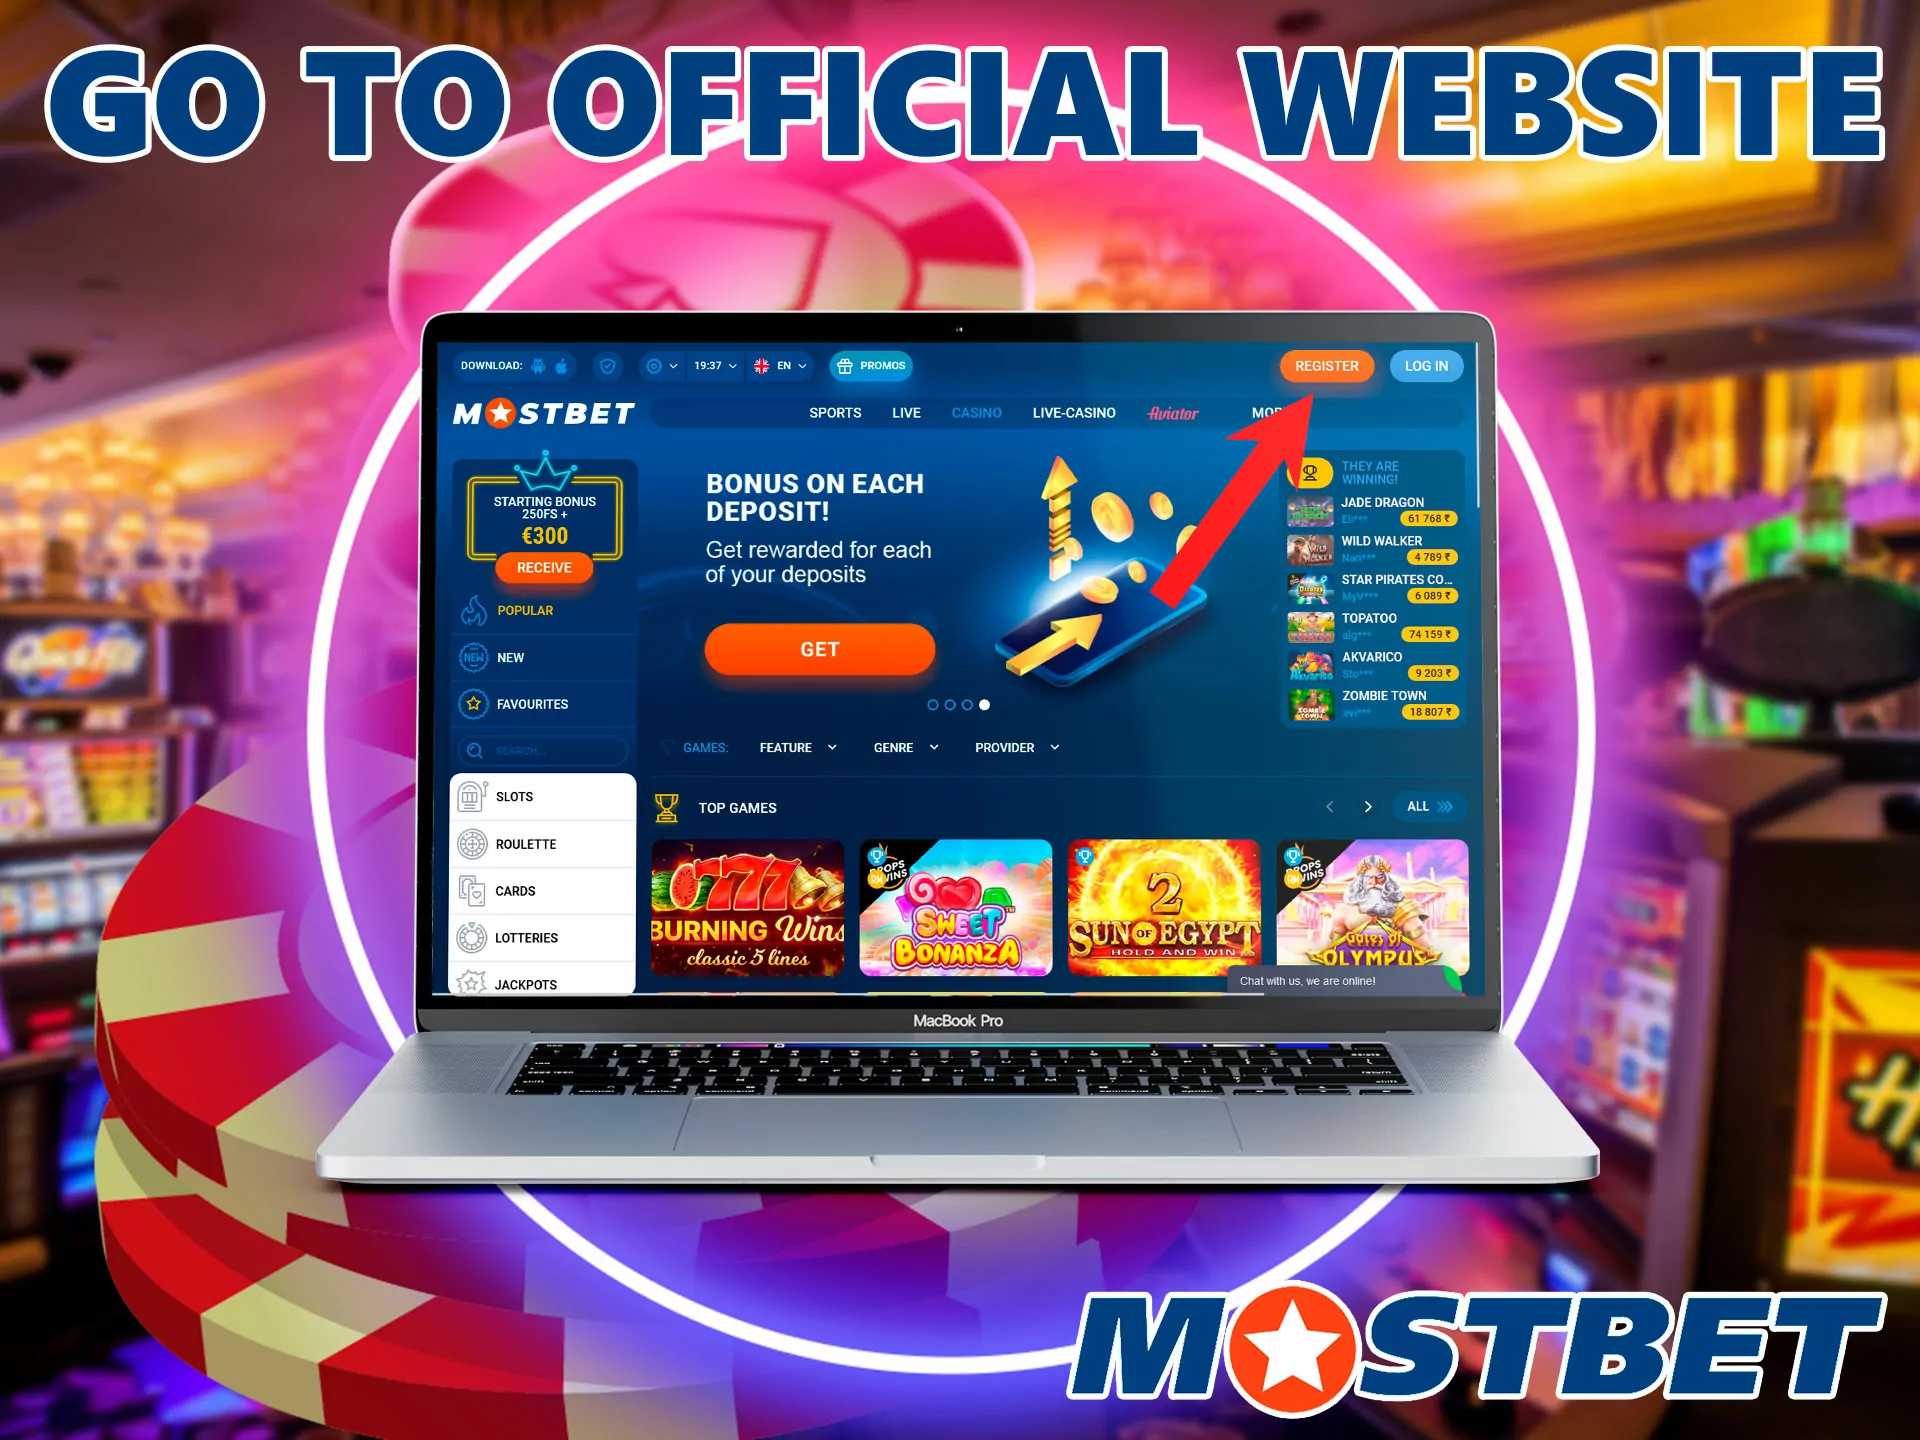 Visit the main page of the official website of the Mostbet casino, this can be done by clicking on the link in the header of this article.